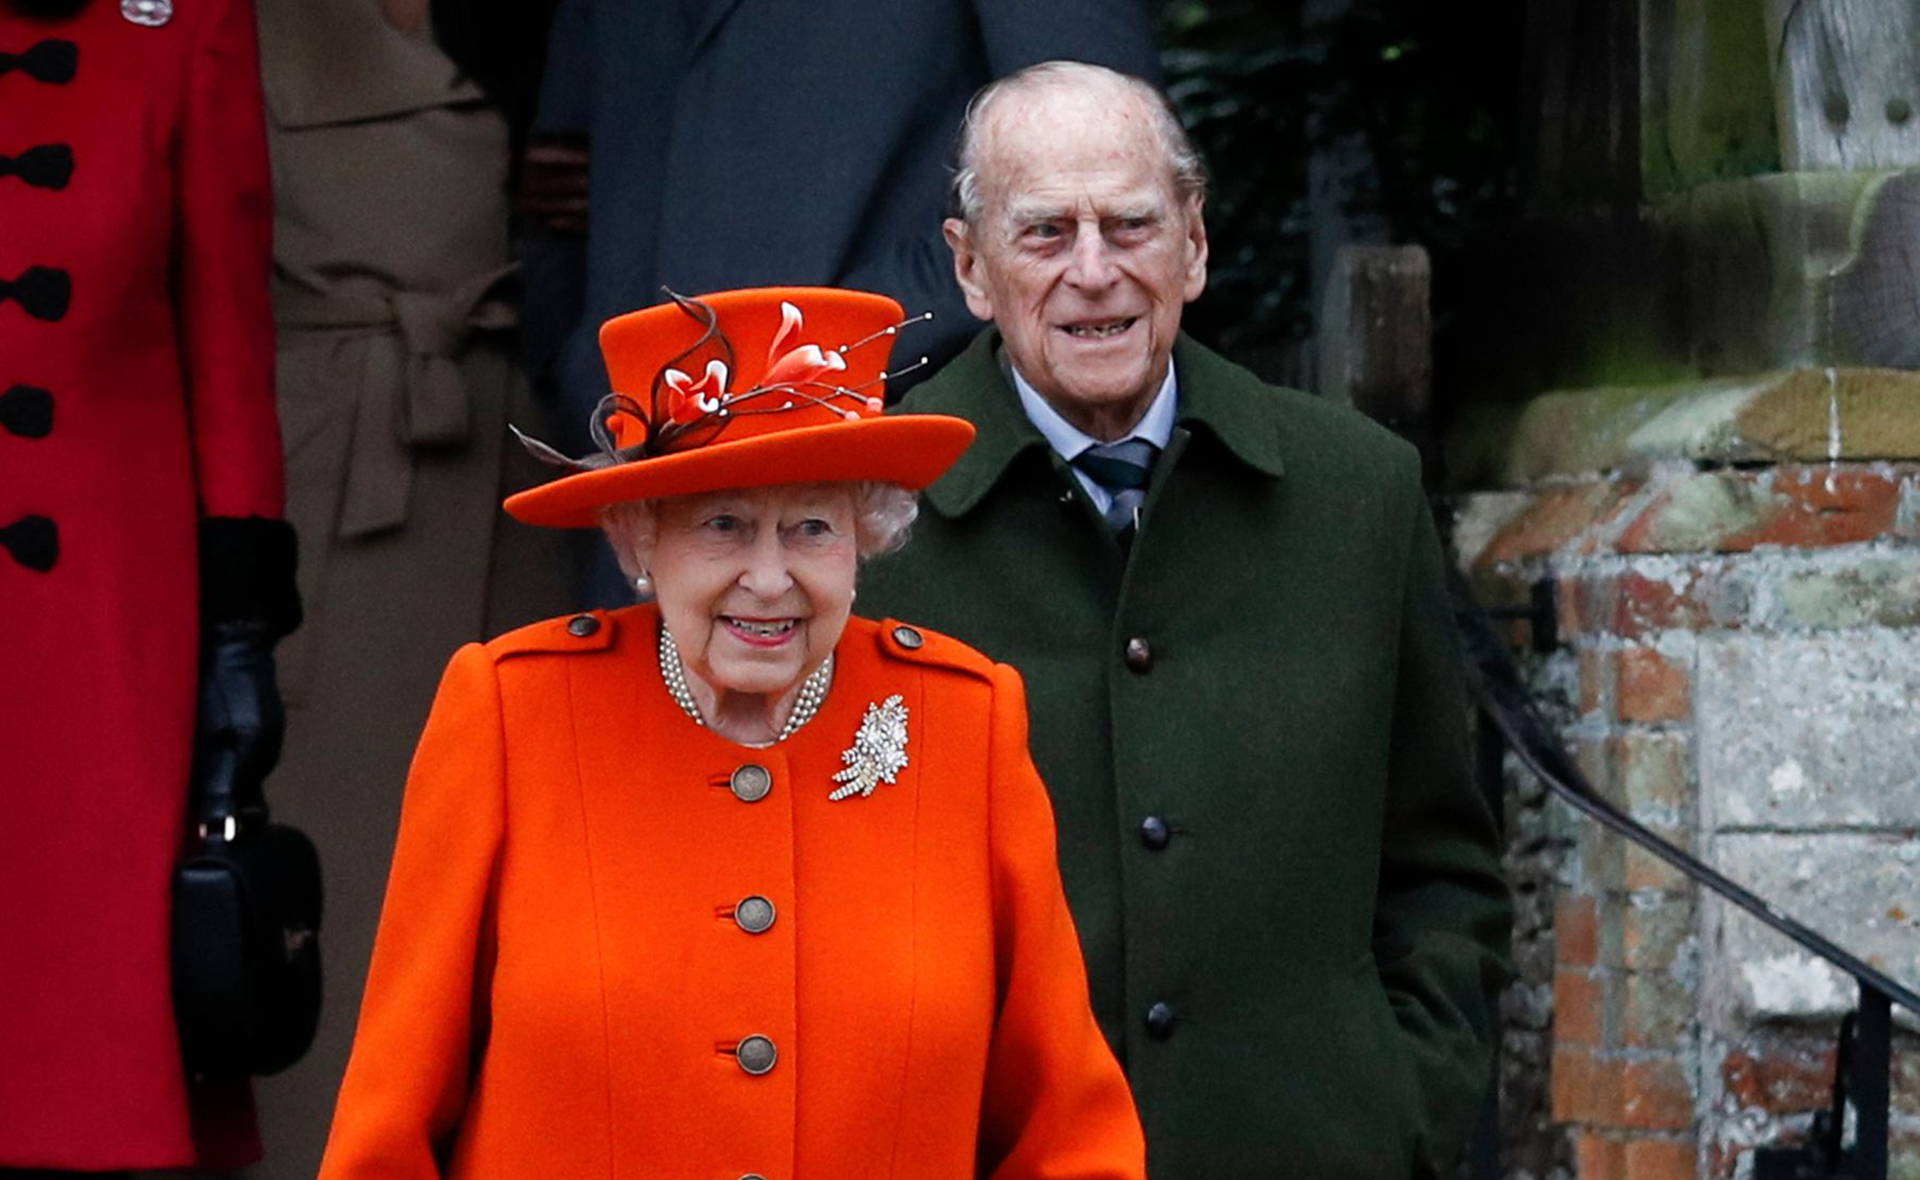 EXCLUSIVE: The royal family rally around the Queen as she faces her first Christmas without Prince Philip